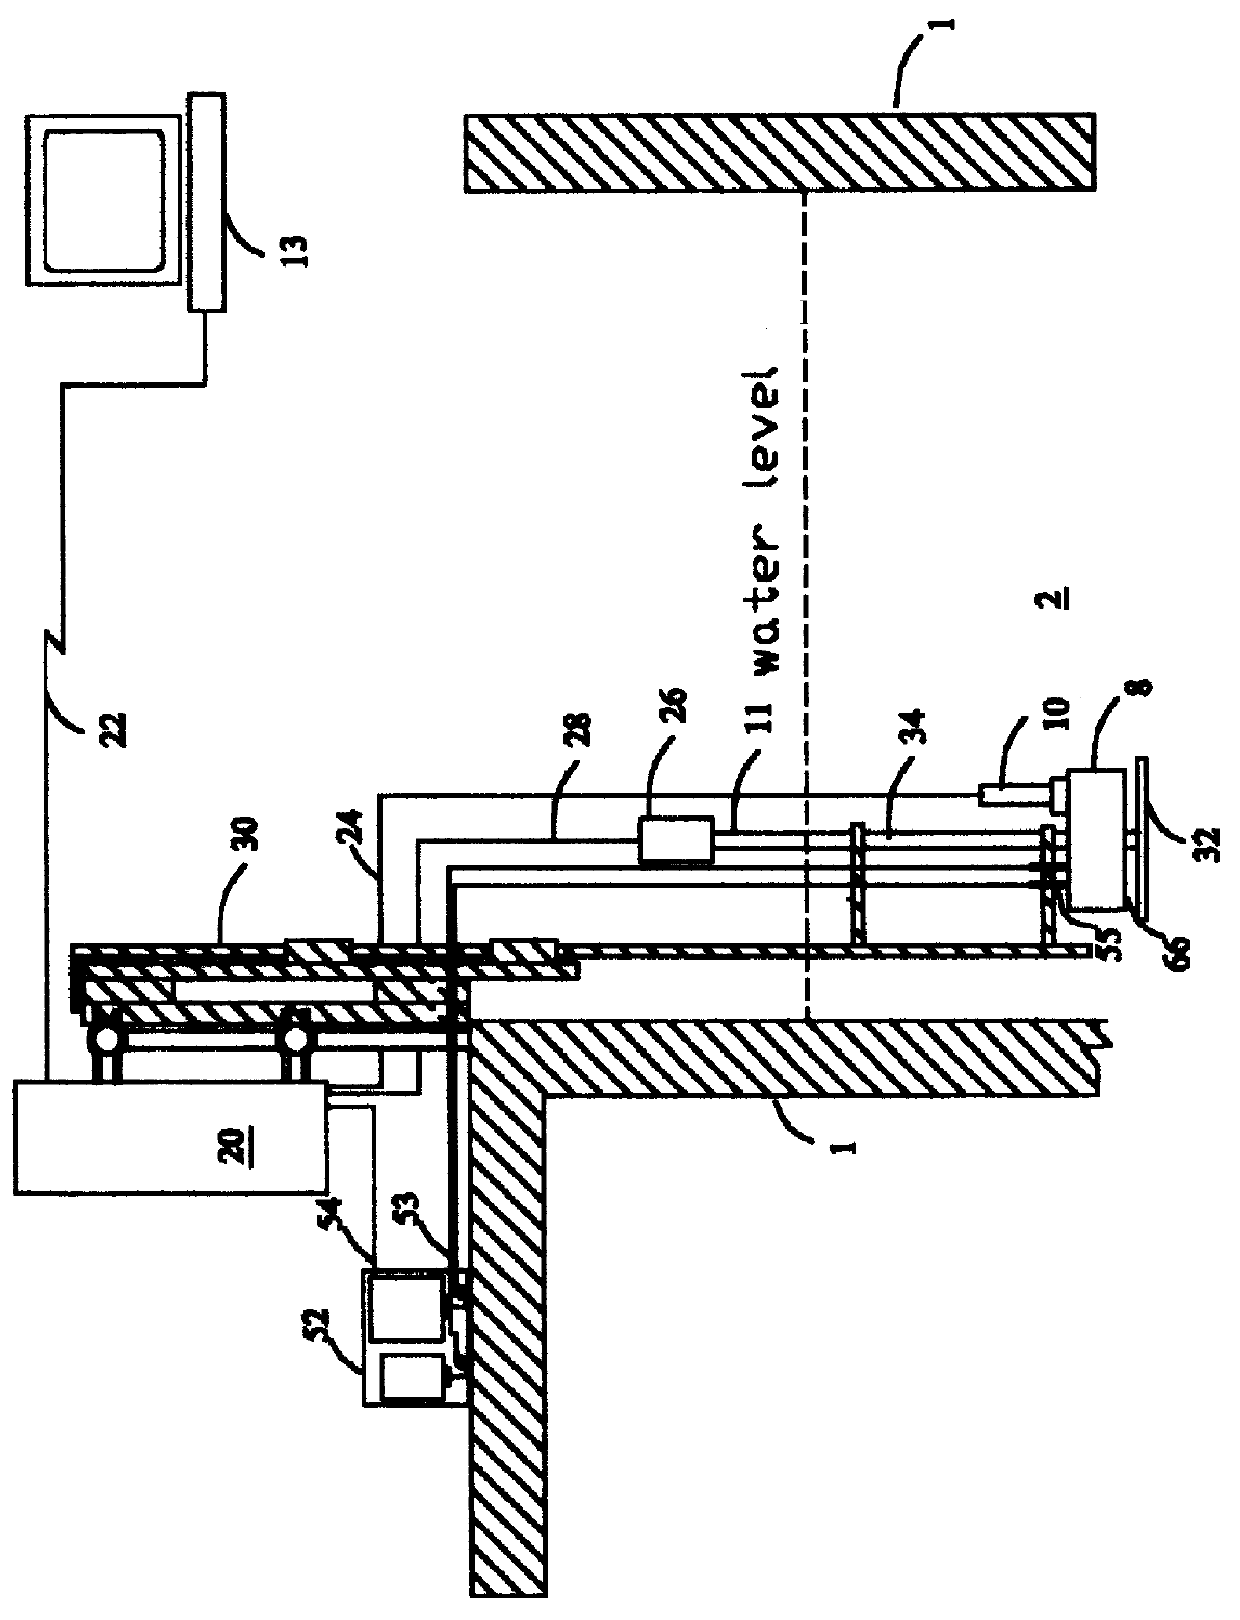 Apparatus for measuring ammonia in biochemical processes